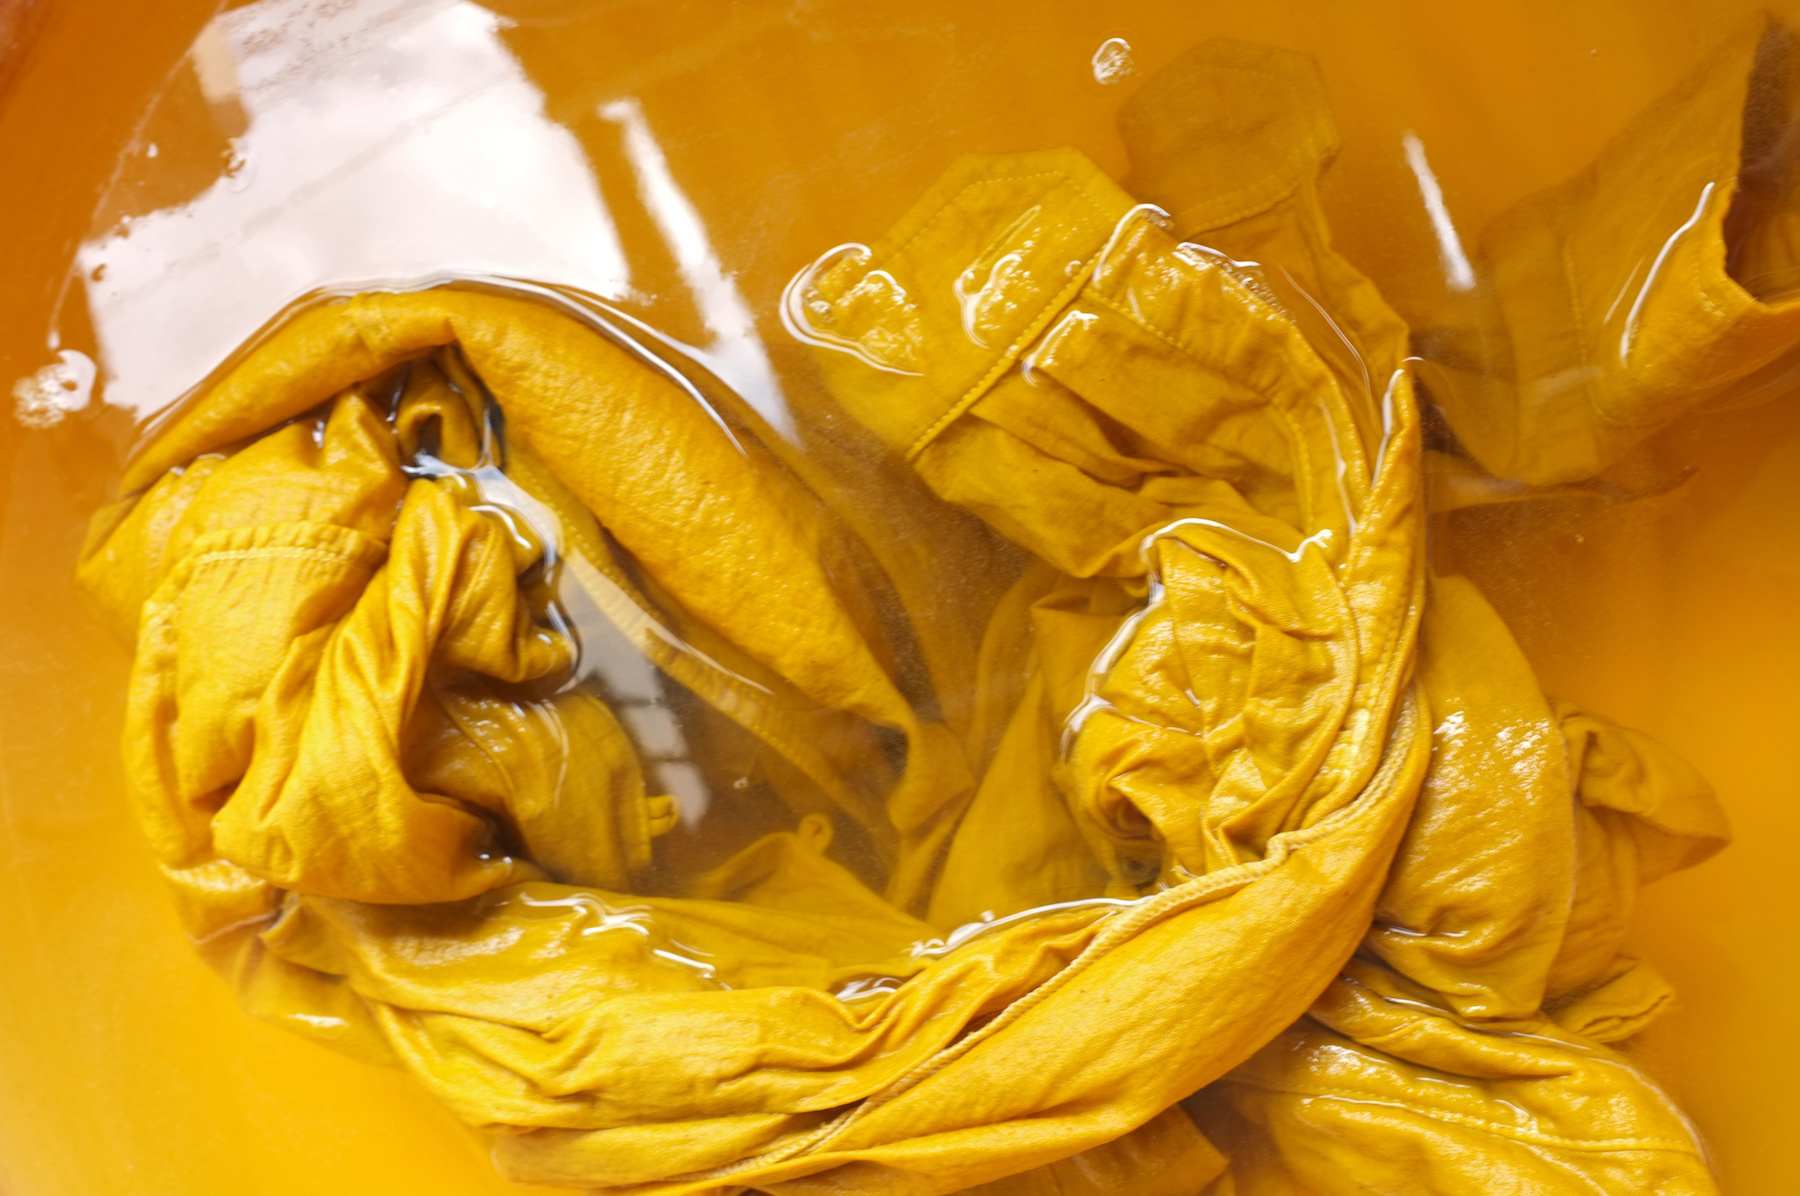 Dyeing a garment with natural dye